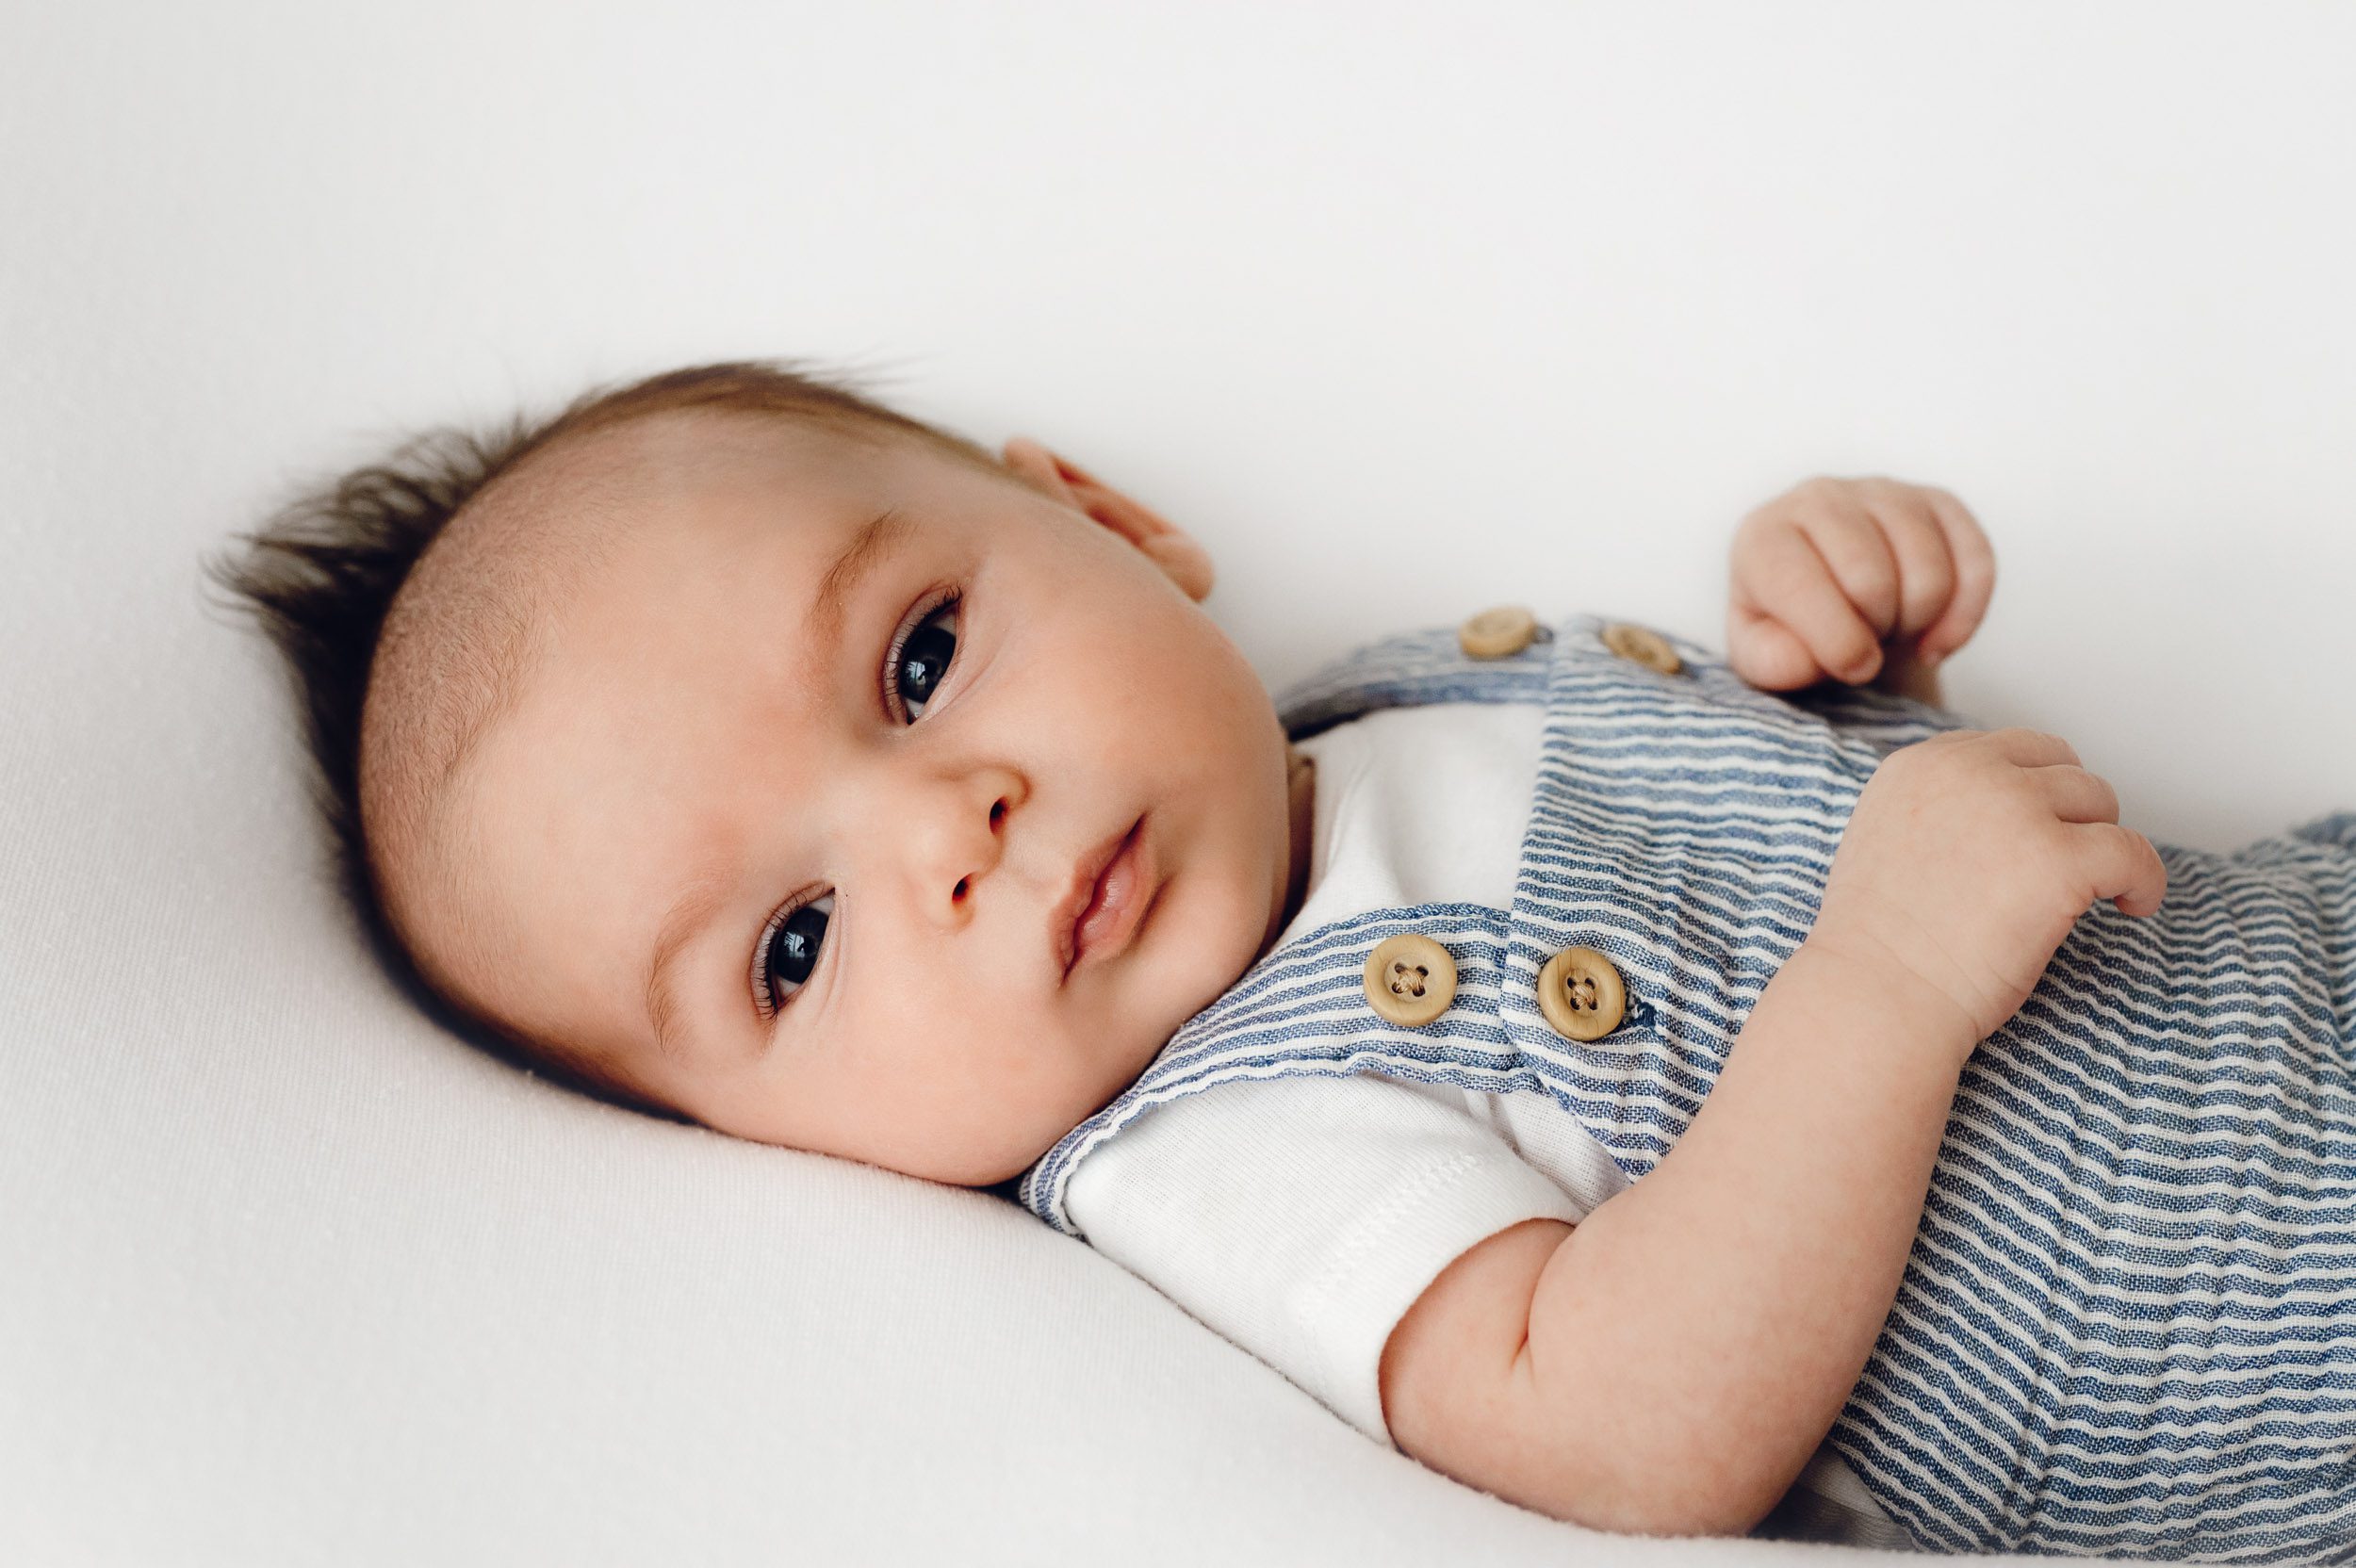 an 8 week old baby boy with mohawk hair wearing a blue and white striped romper laying on a white backdrop and looking directly at the camera during a newborn photo session